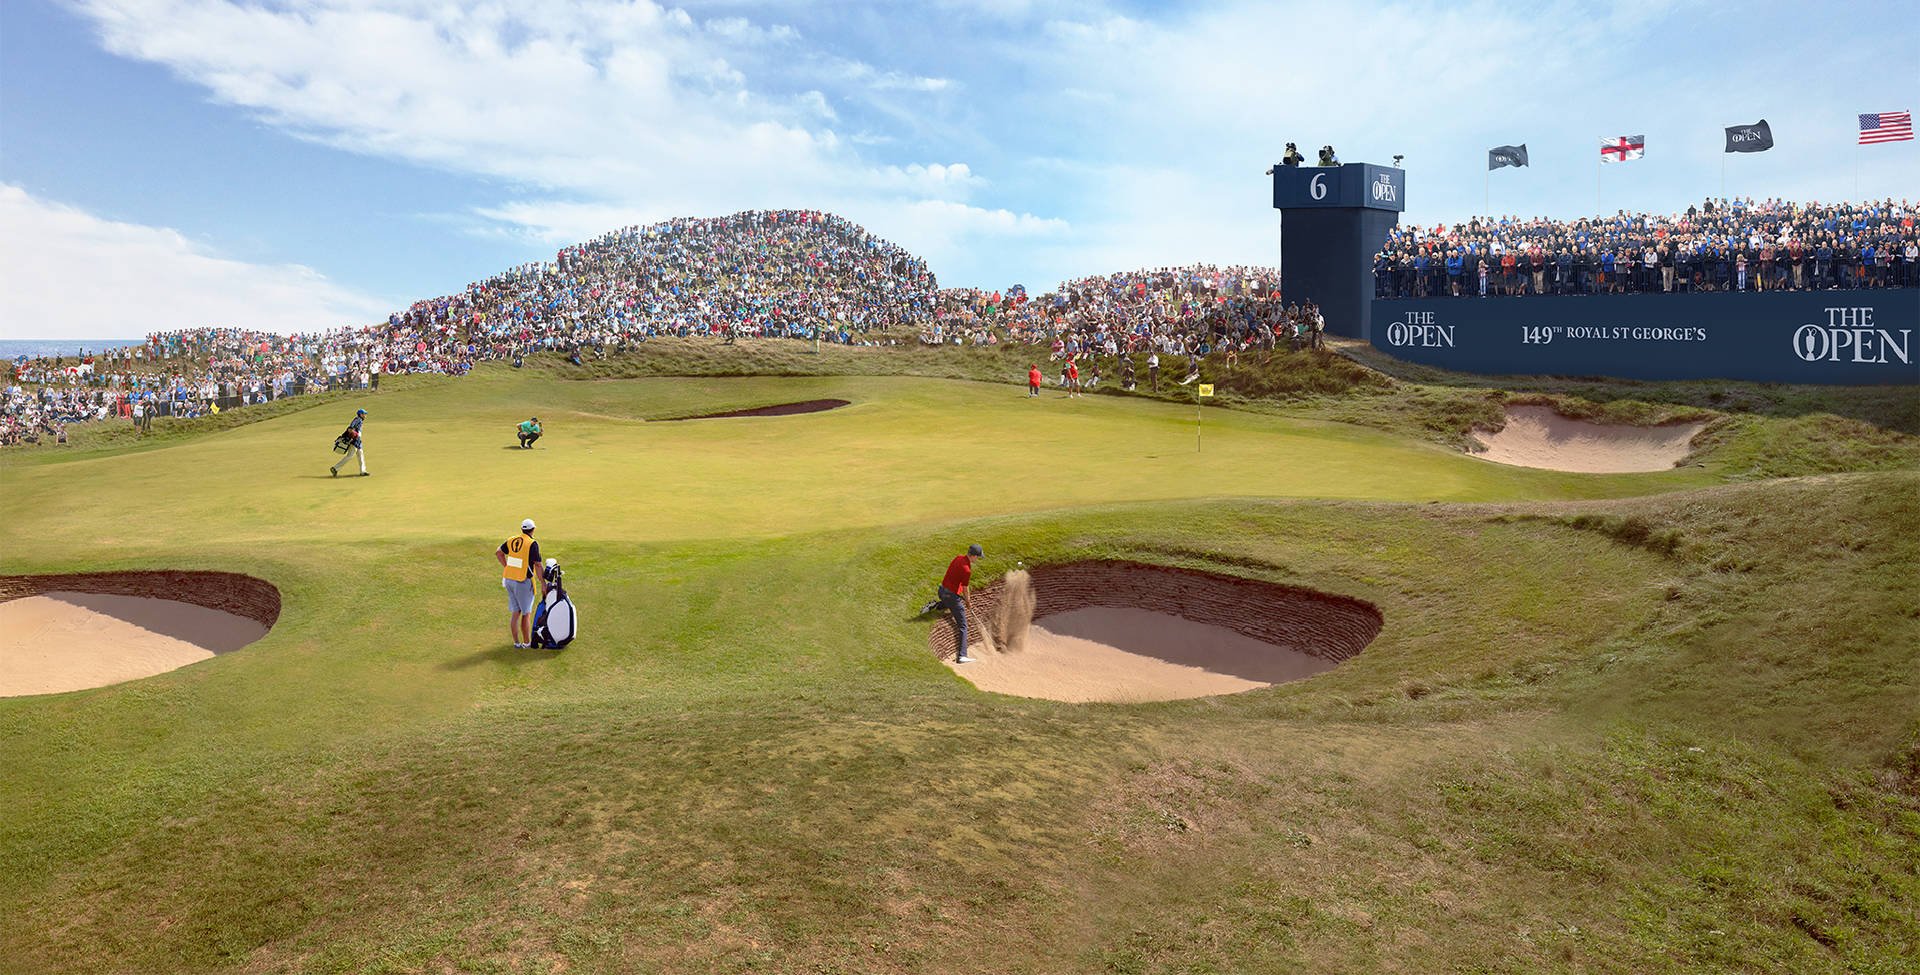 The 149th Open at Royal St George's | The Open